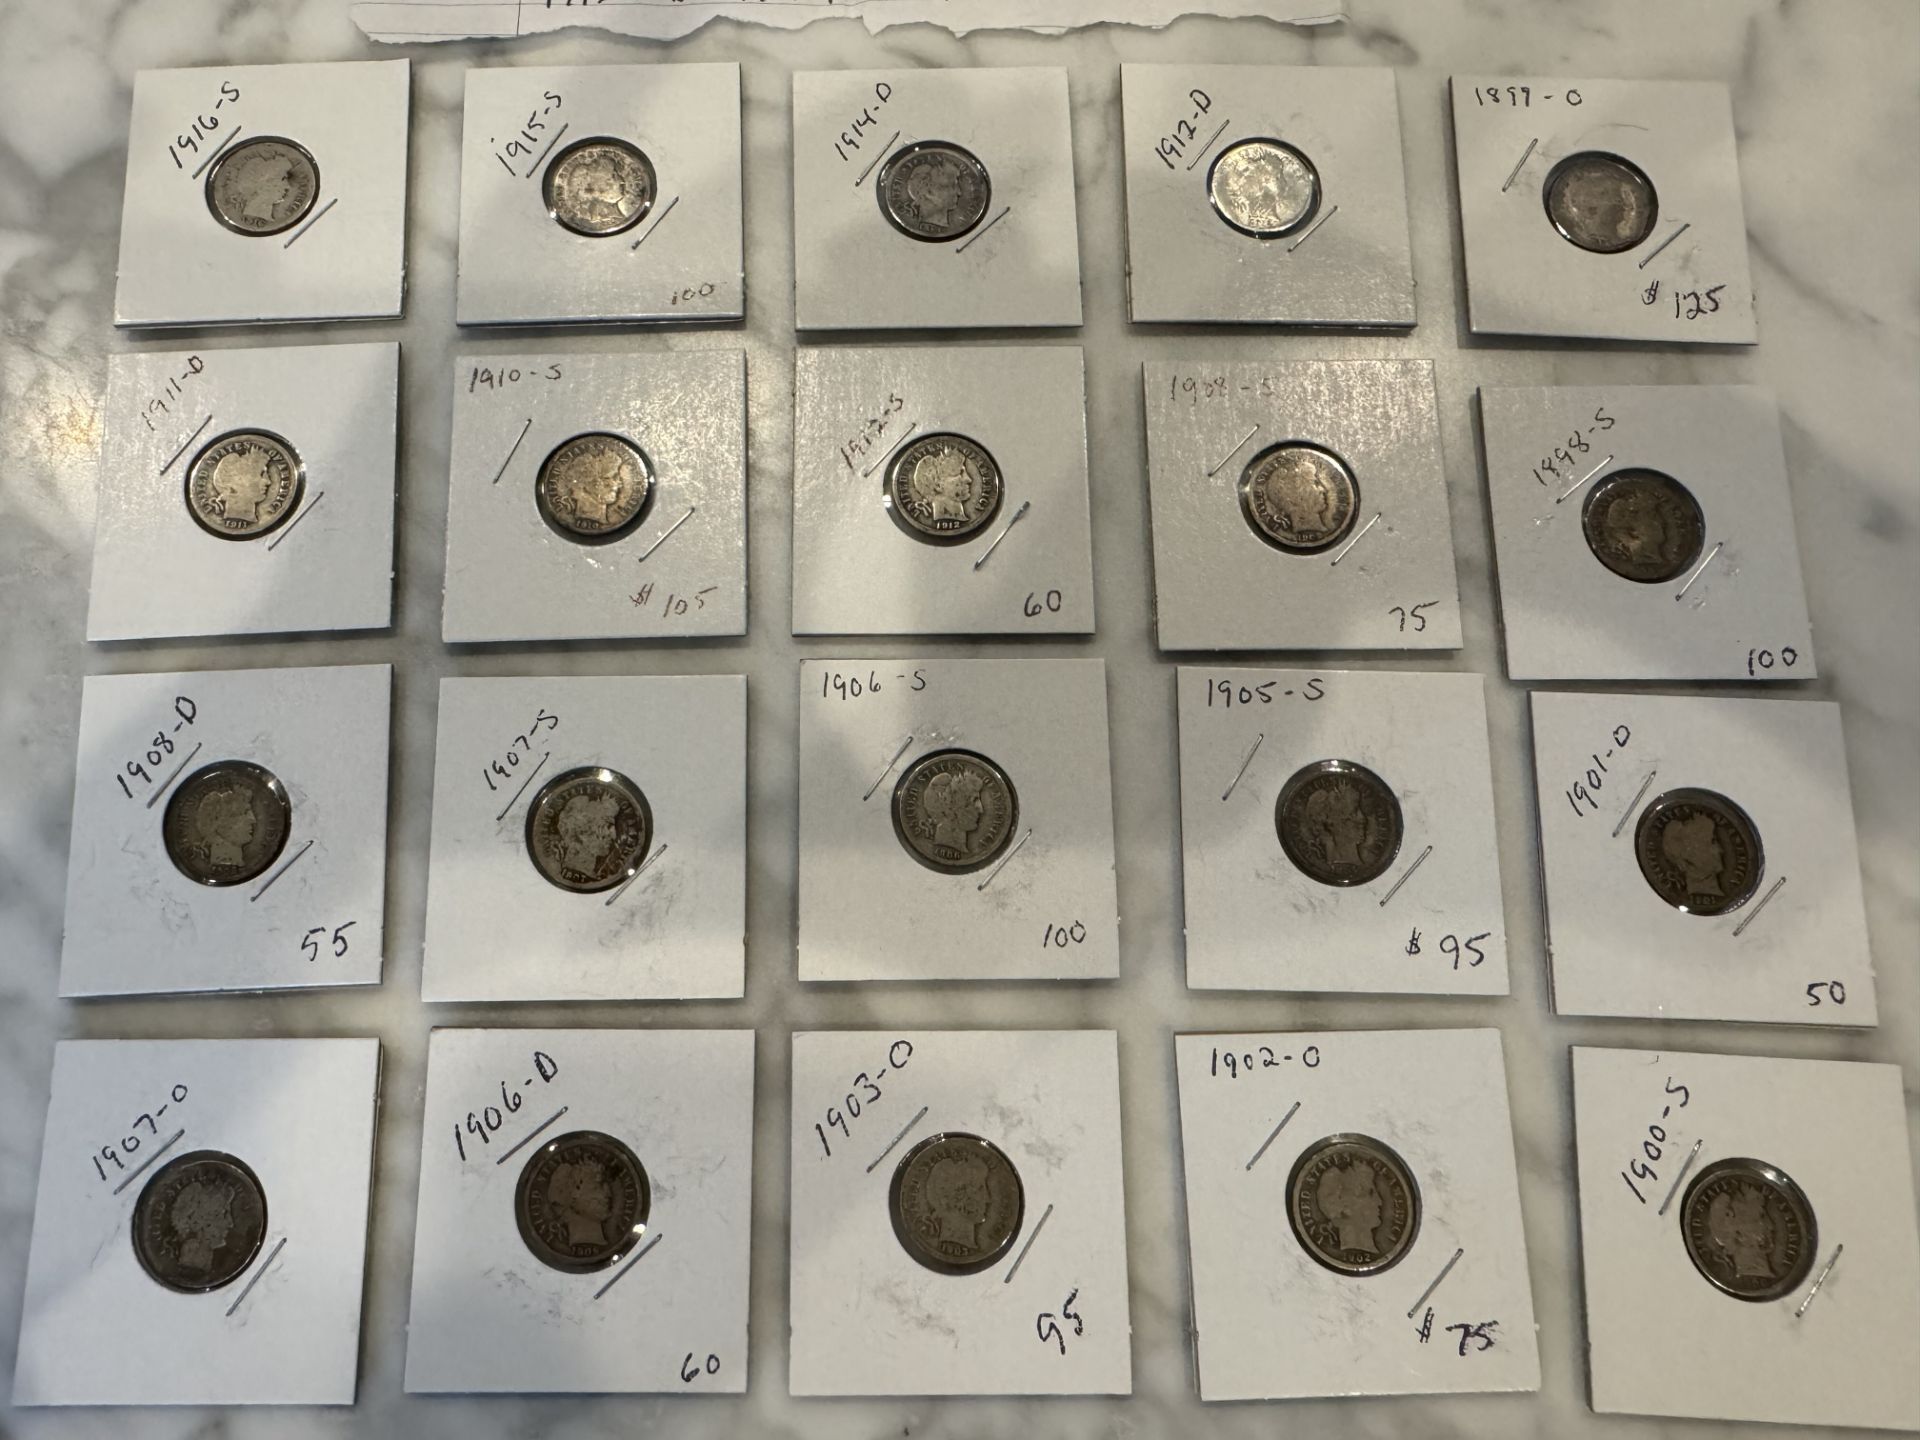 US SILVER BARBER DIMES "LIST IN PHOTOS" - Image 3 of 3